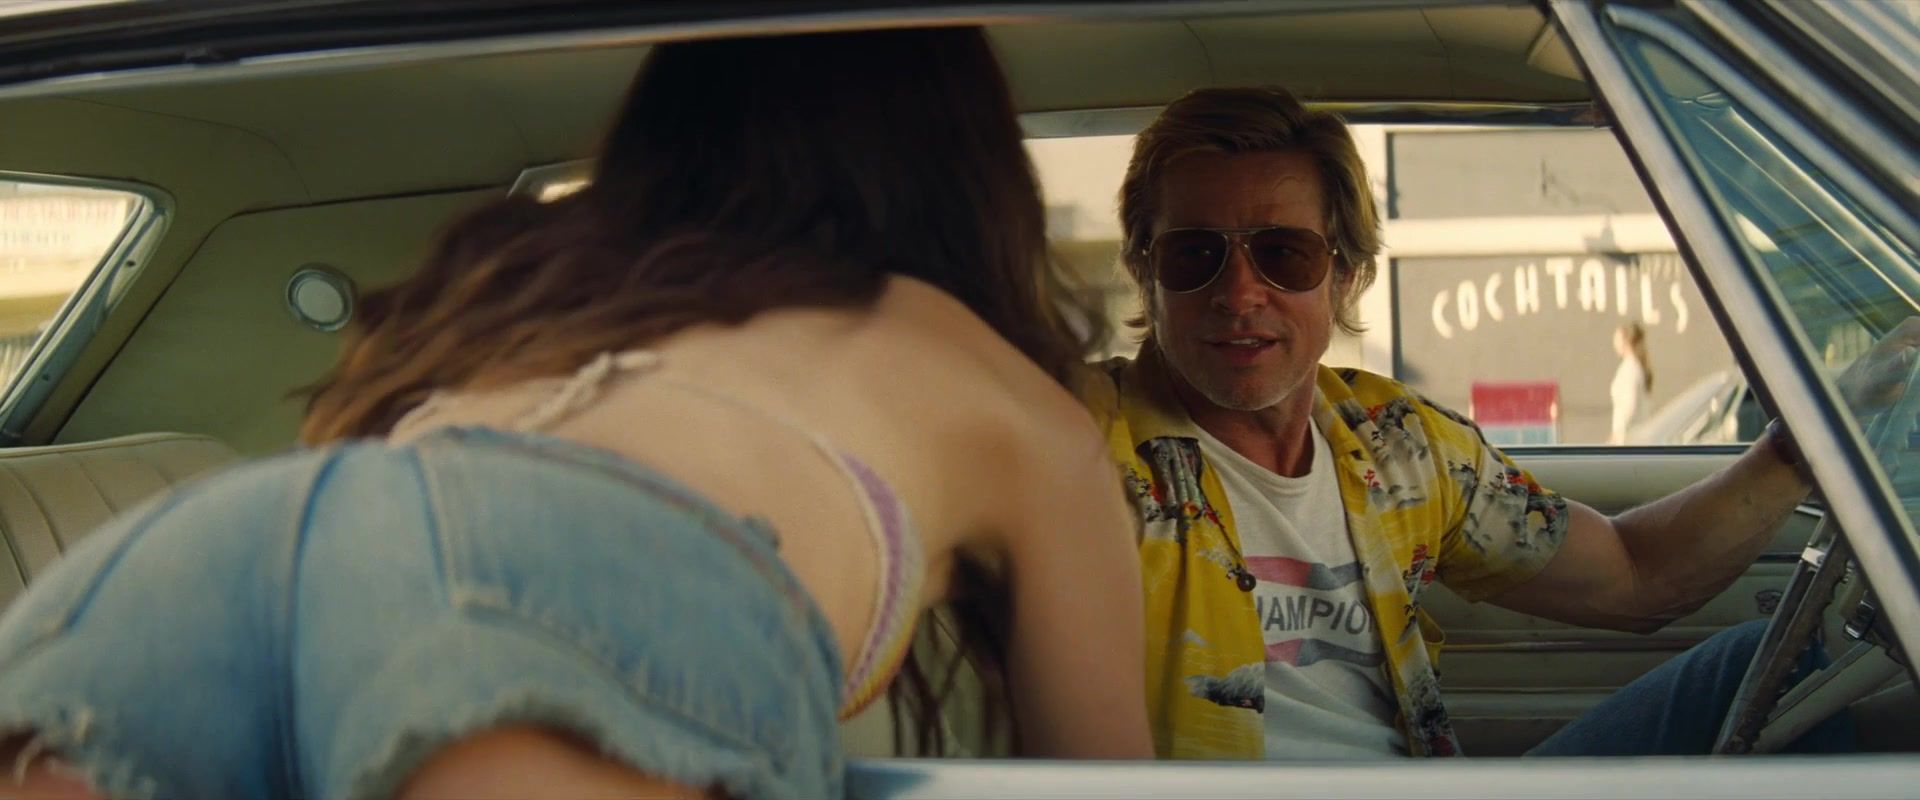 Awempire Sexy Dakota Fanning, Margaret Qualley naked- Once Upon A Time In Hollywood (2019) Gay Smoking - 1